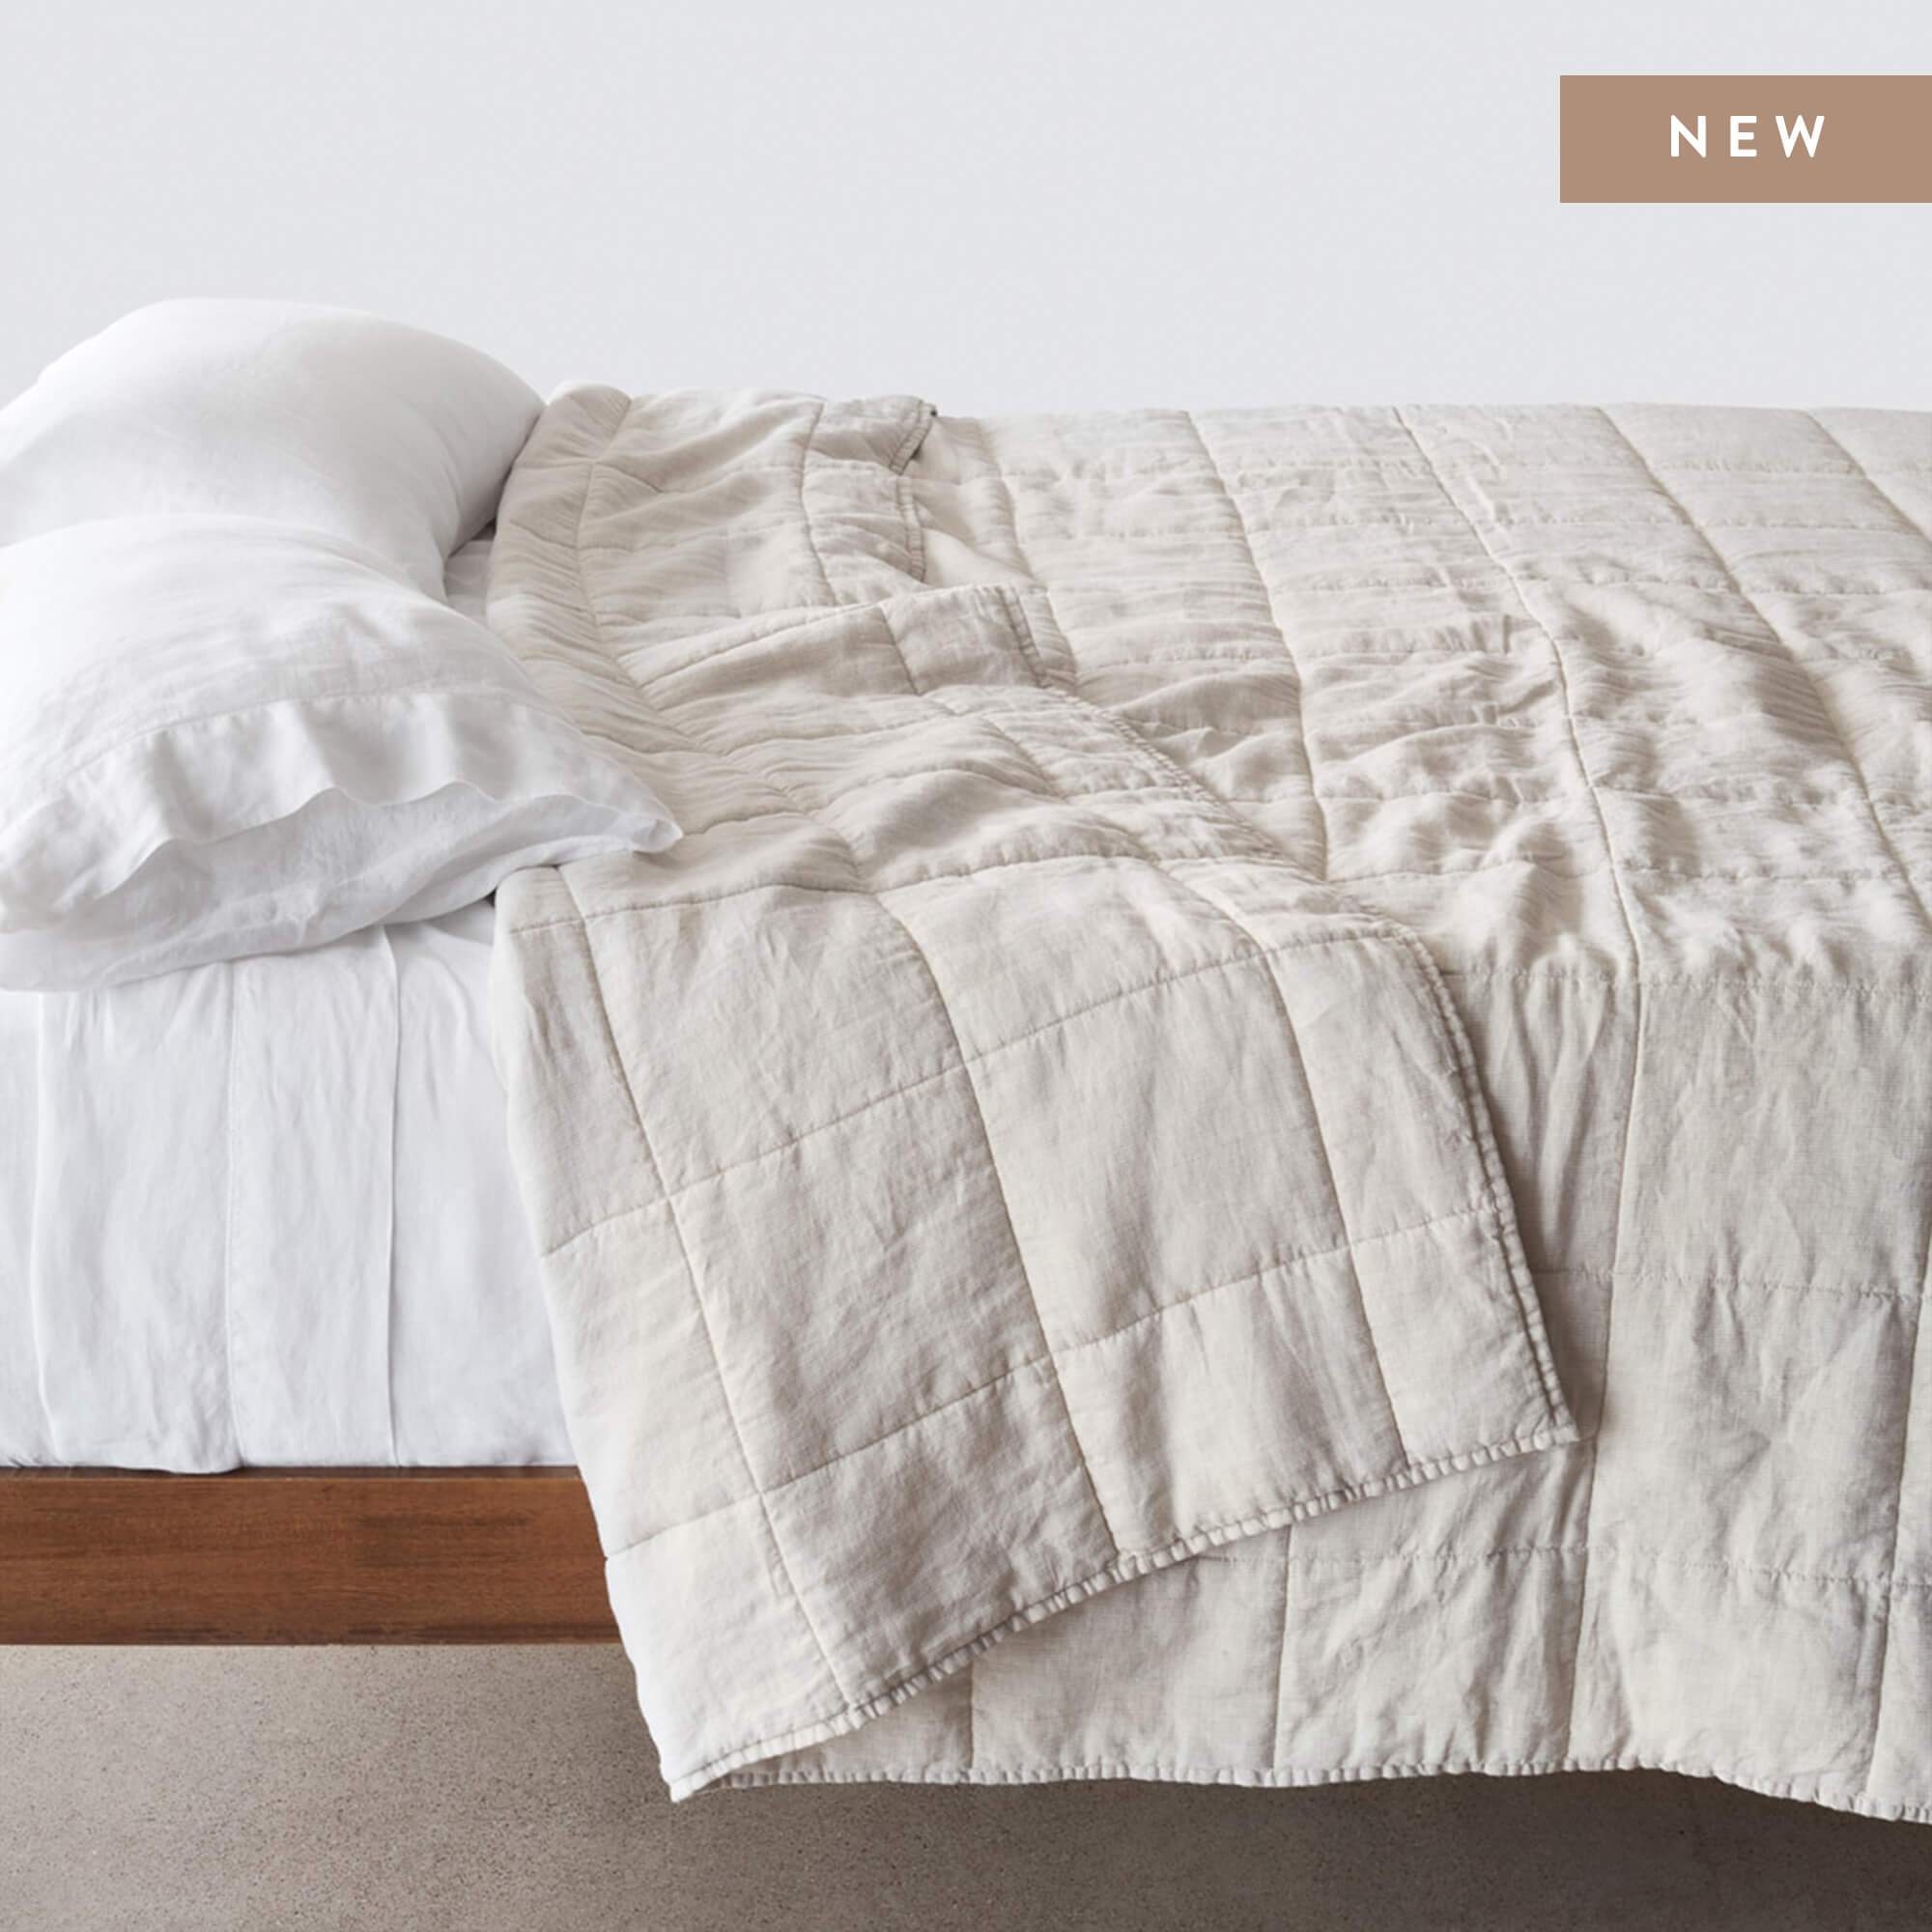 Stonewashed Linen Quilt - Sand Stripe - King/Cali King By The Citizenry - Image 0